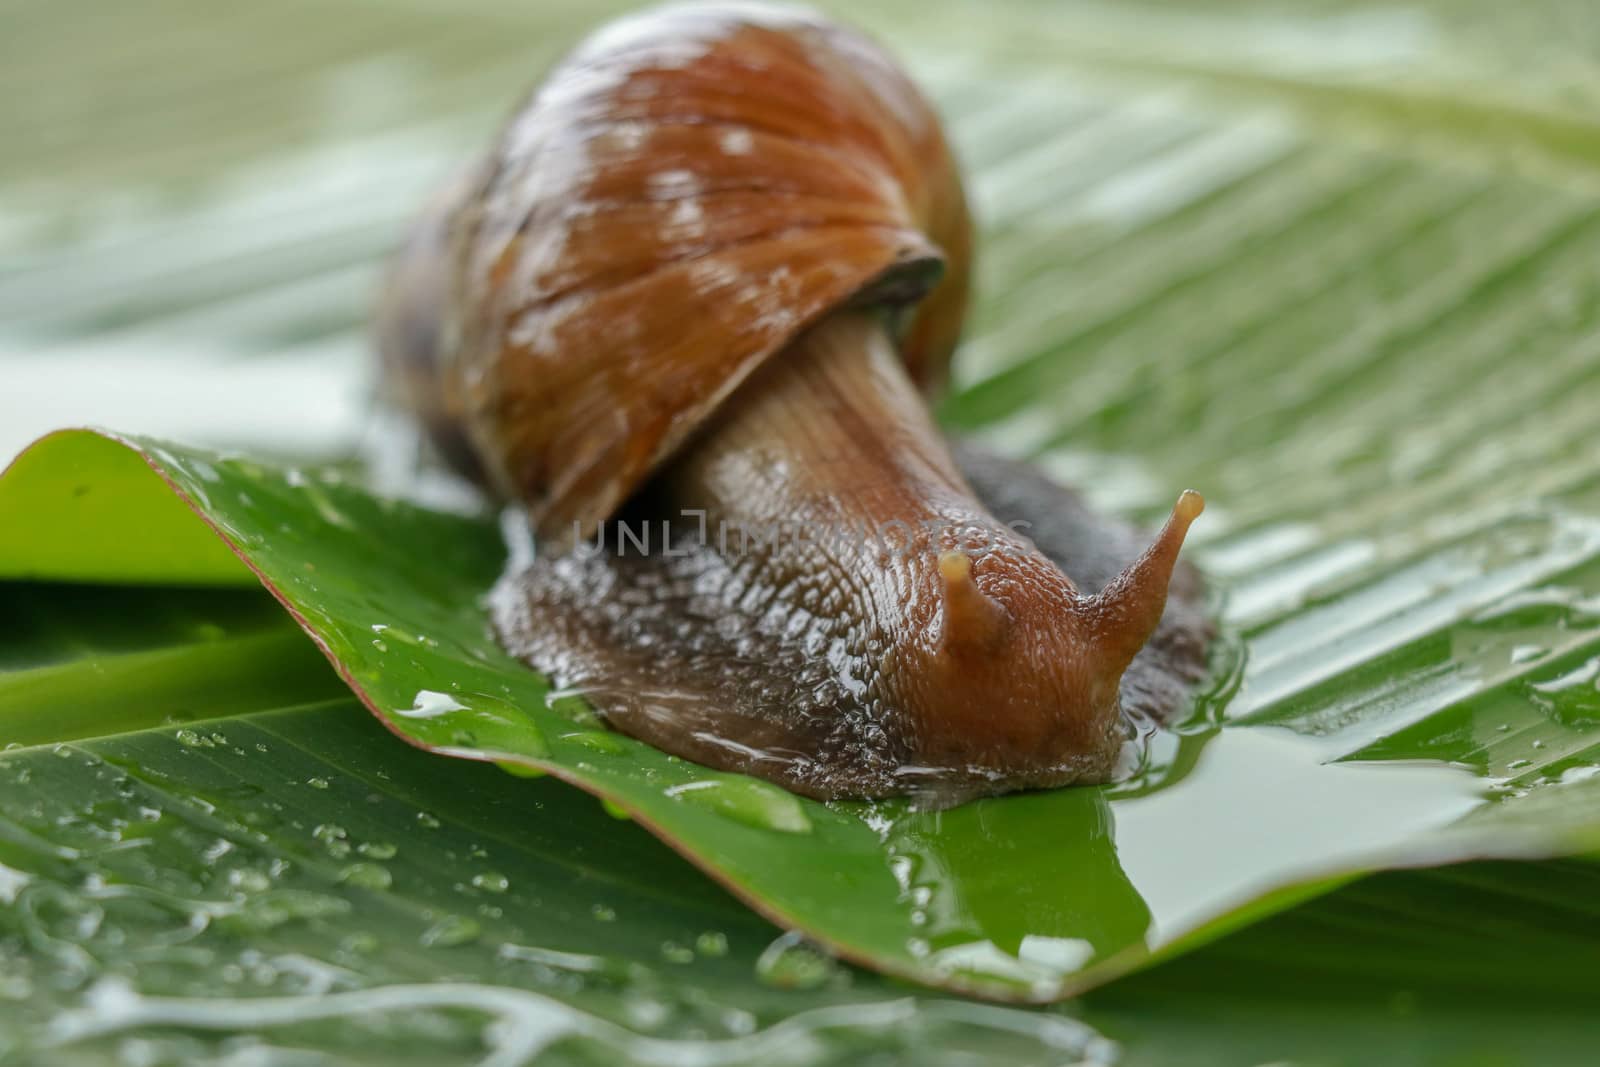 A large brown snail, Giant African snail, Achatina fulica, Lissachatina fulica, creeps on the green wet leaf. Horns are visible, close-up.